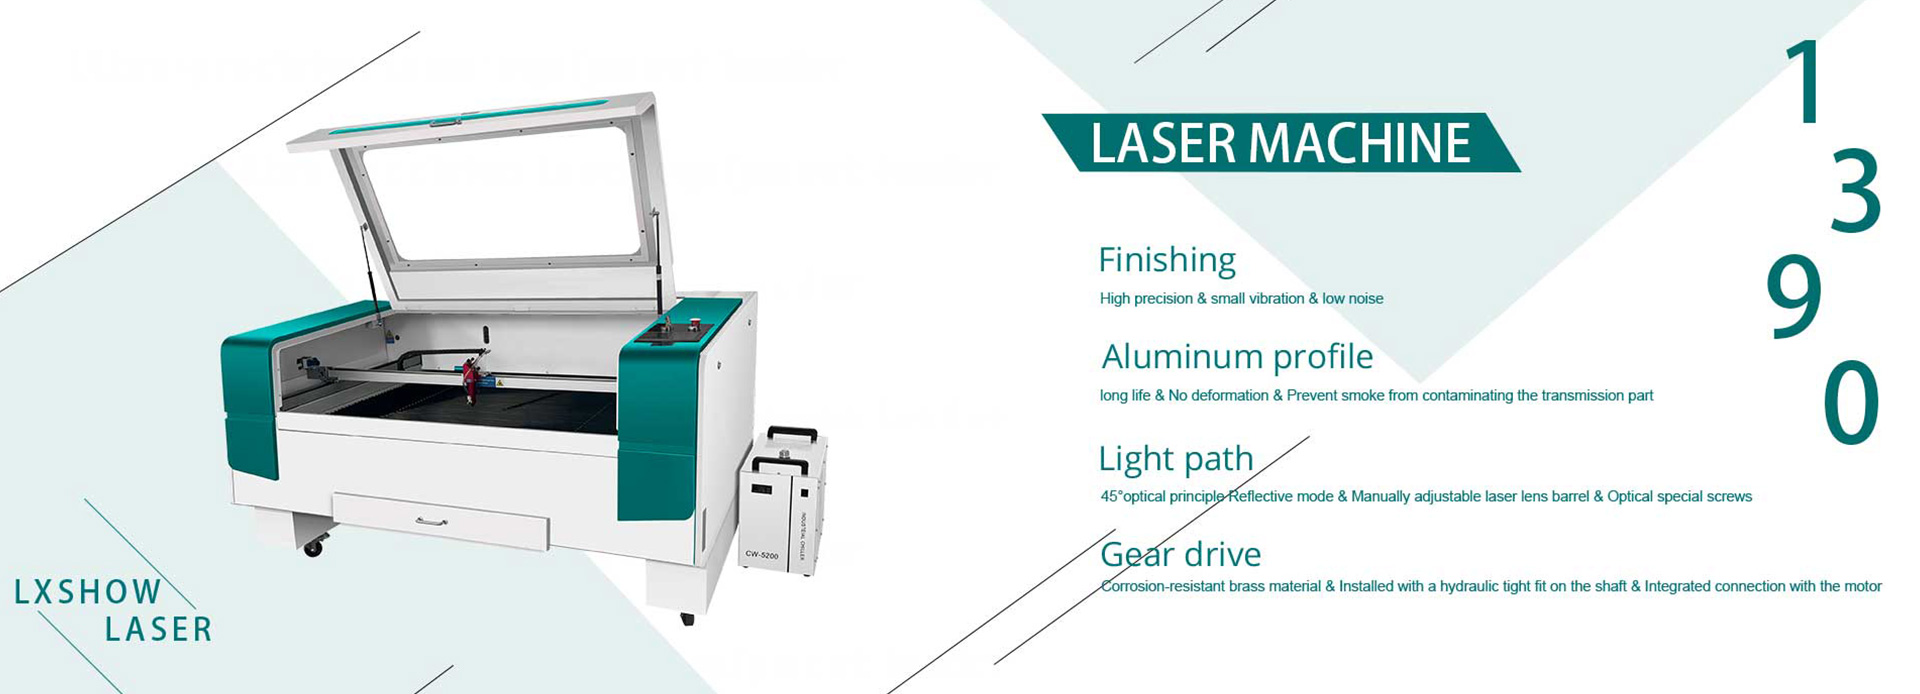 Professional CO2 Laser Cutter for Acrylic, Wood, Leather, Glass